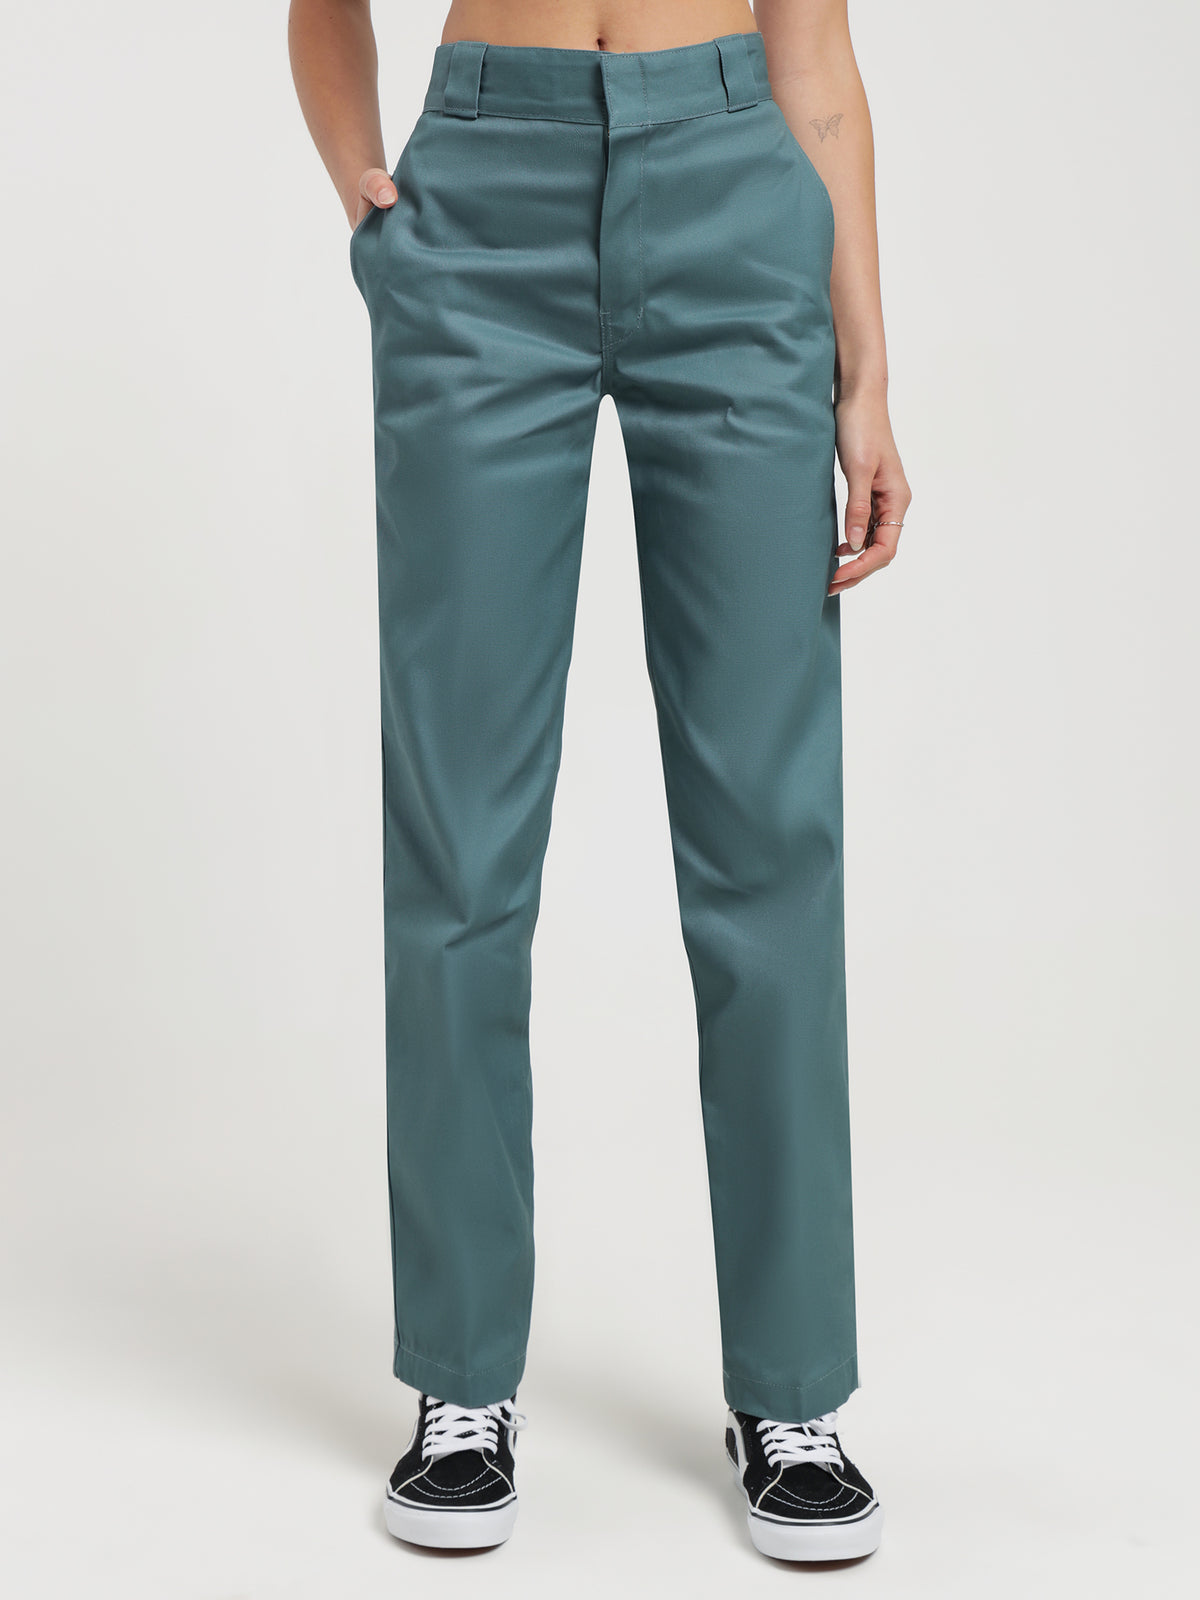 875 Tapered Fit Pants in Lincoln Green